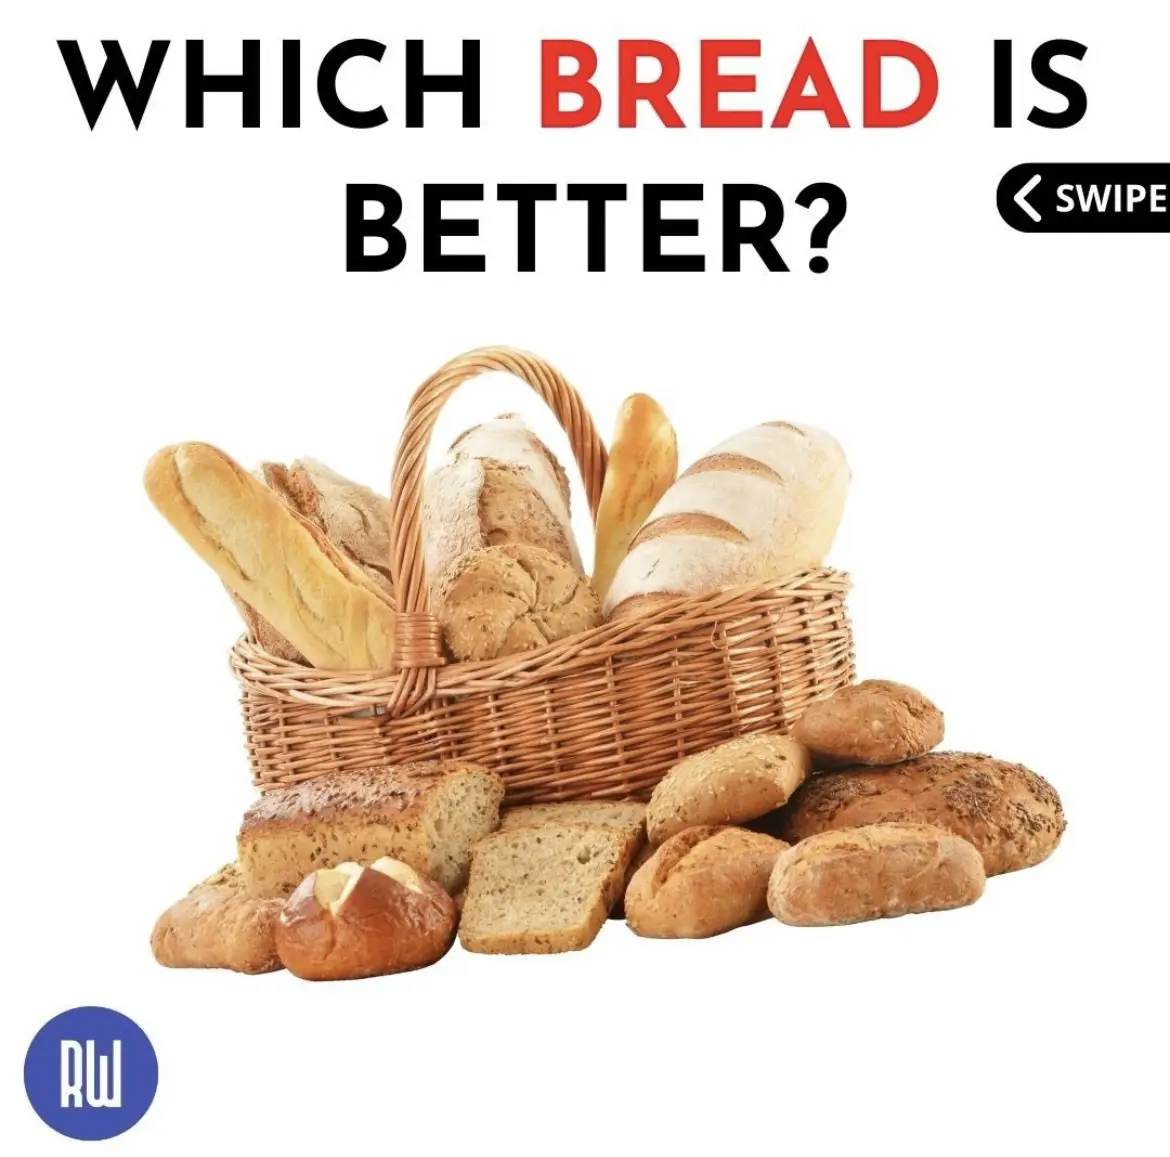 Bread for the win 🏆 's images